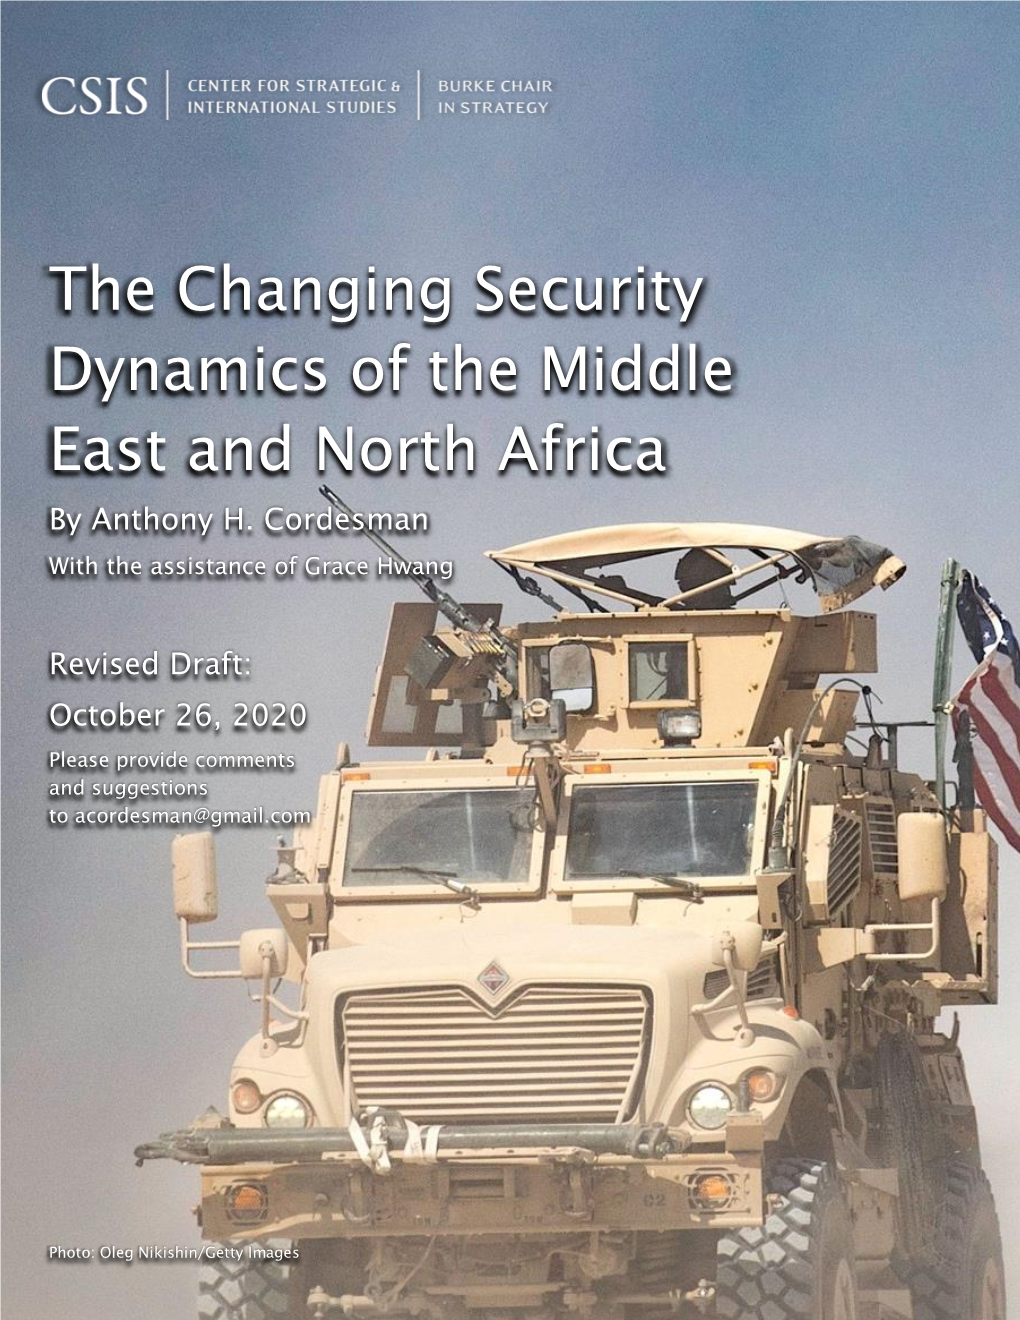 The Changing Security Dynamics of the Middle East and North Africa by Anthony H